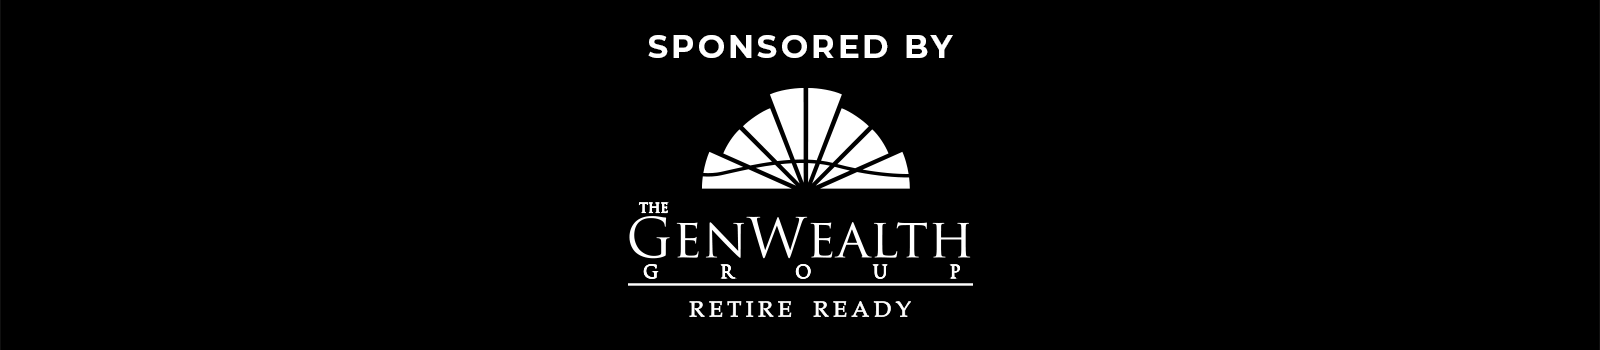 Sponsored by The GenWealth Group. Retire Ready.